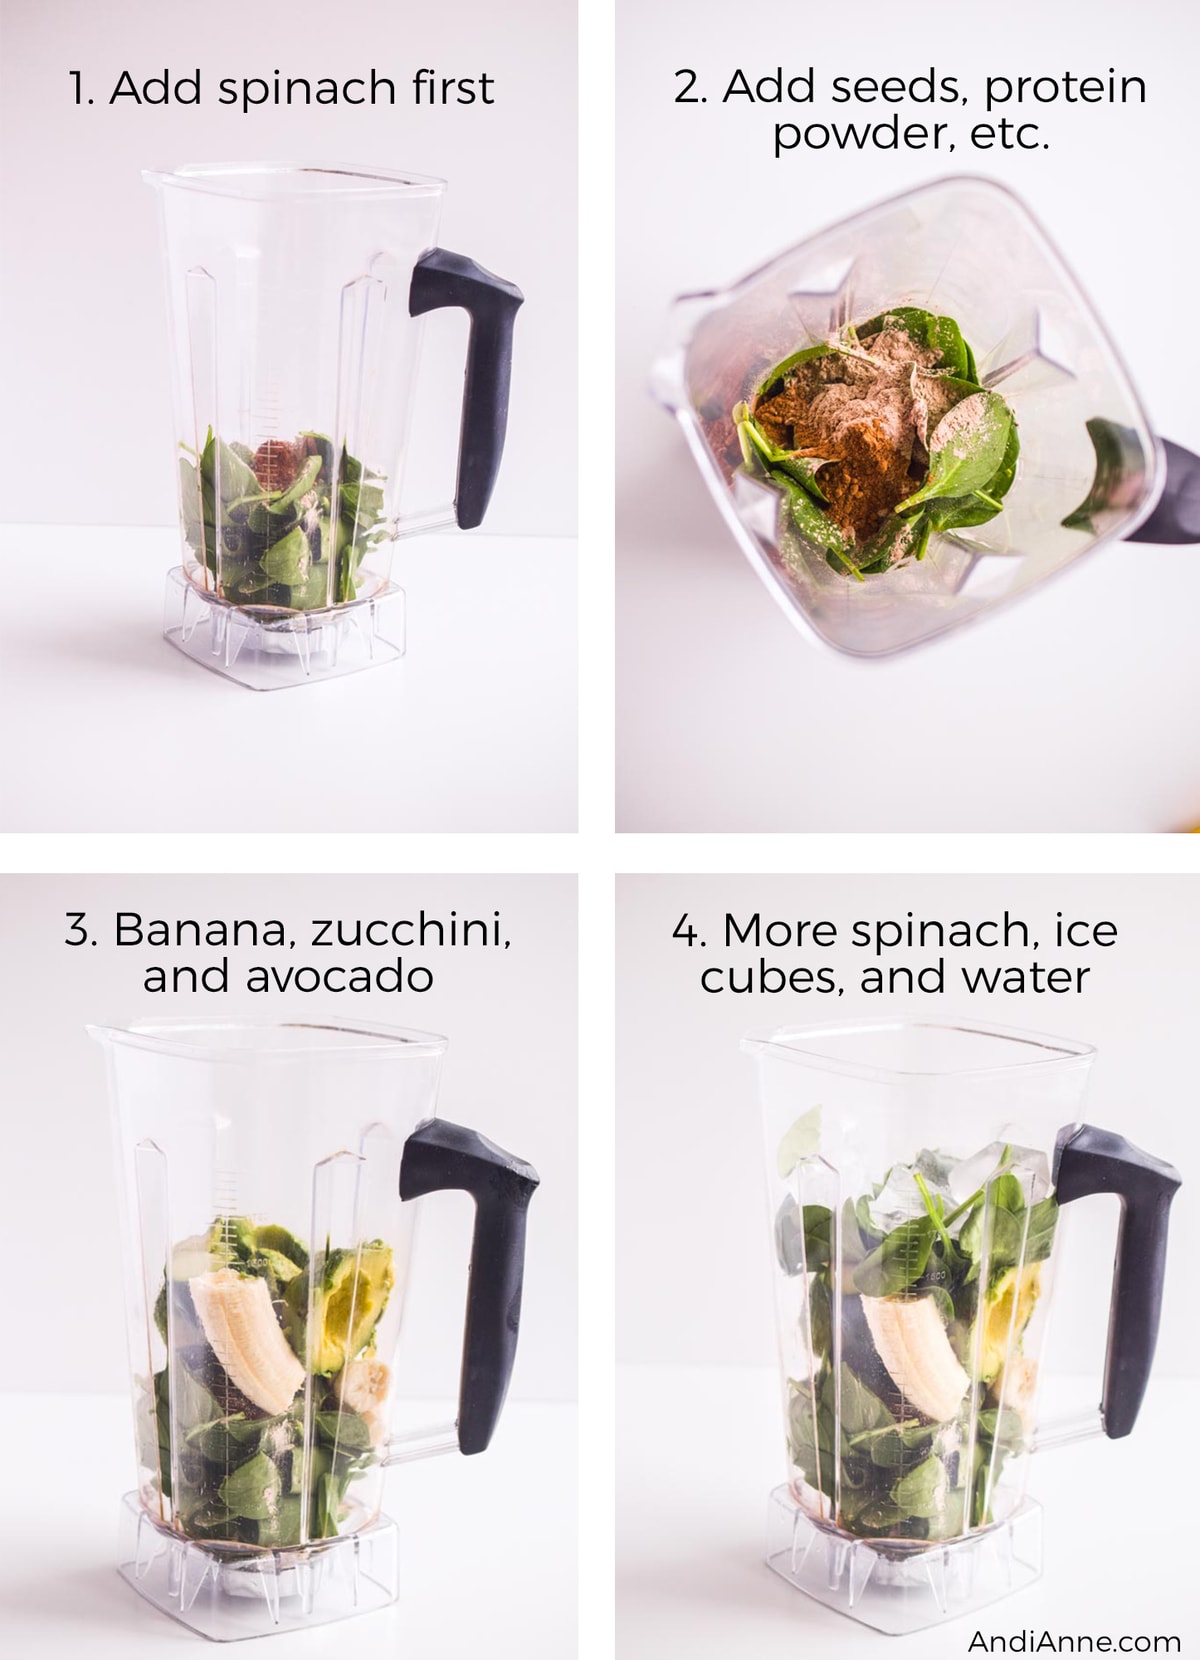 Blender cup holding ingredients to make smoothie. Includes spinach, protein powder, avocado, and ice cubes